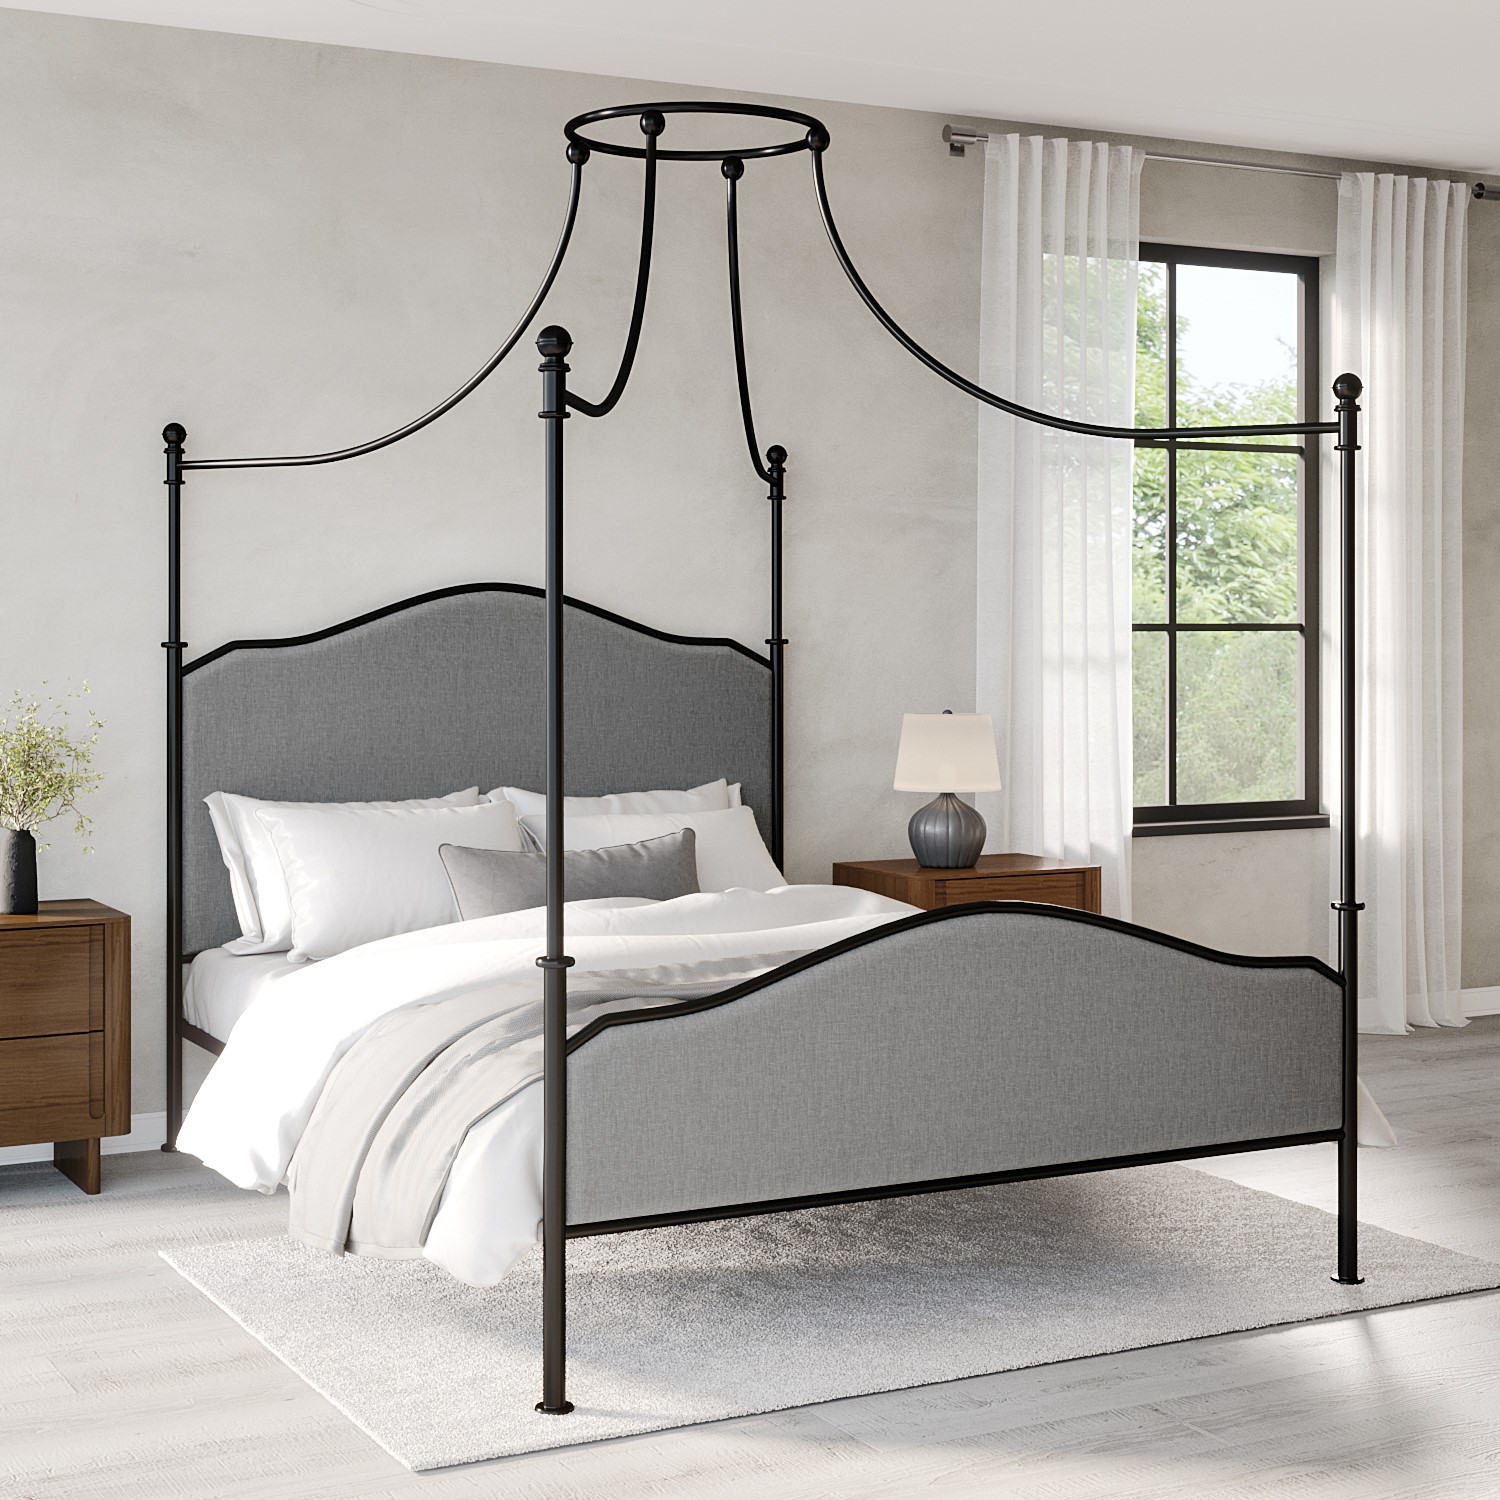 Photo of King size canopy bed frame in black metal - lille